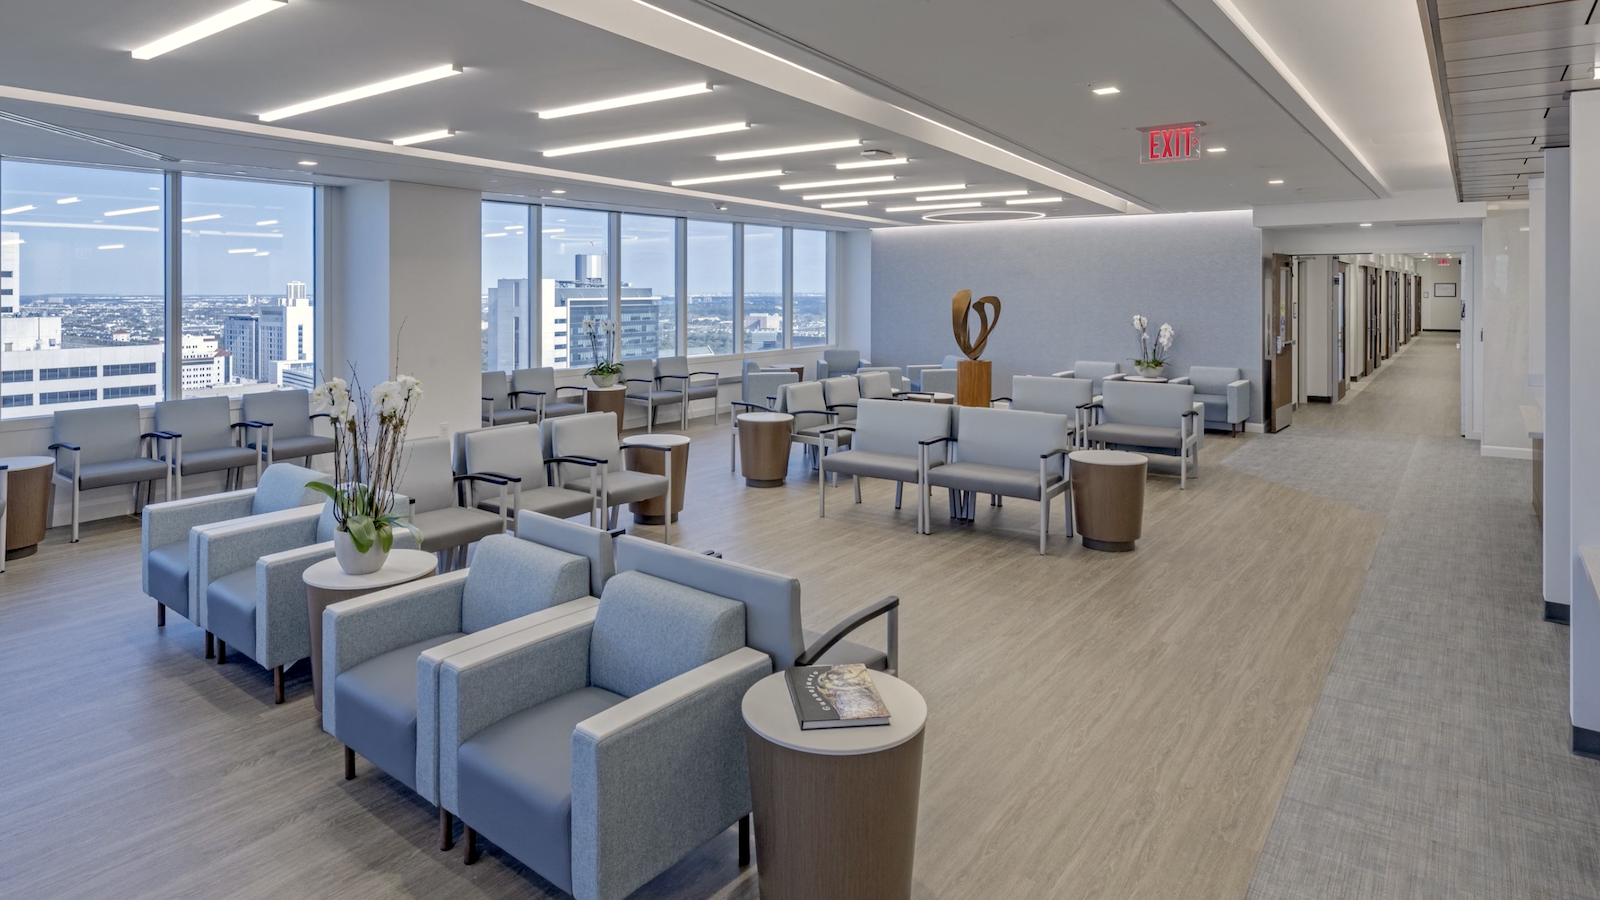 Located in the world-renowned Texas Medical Center, the new Center offers the latest technologies.